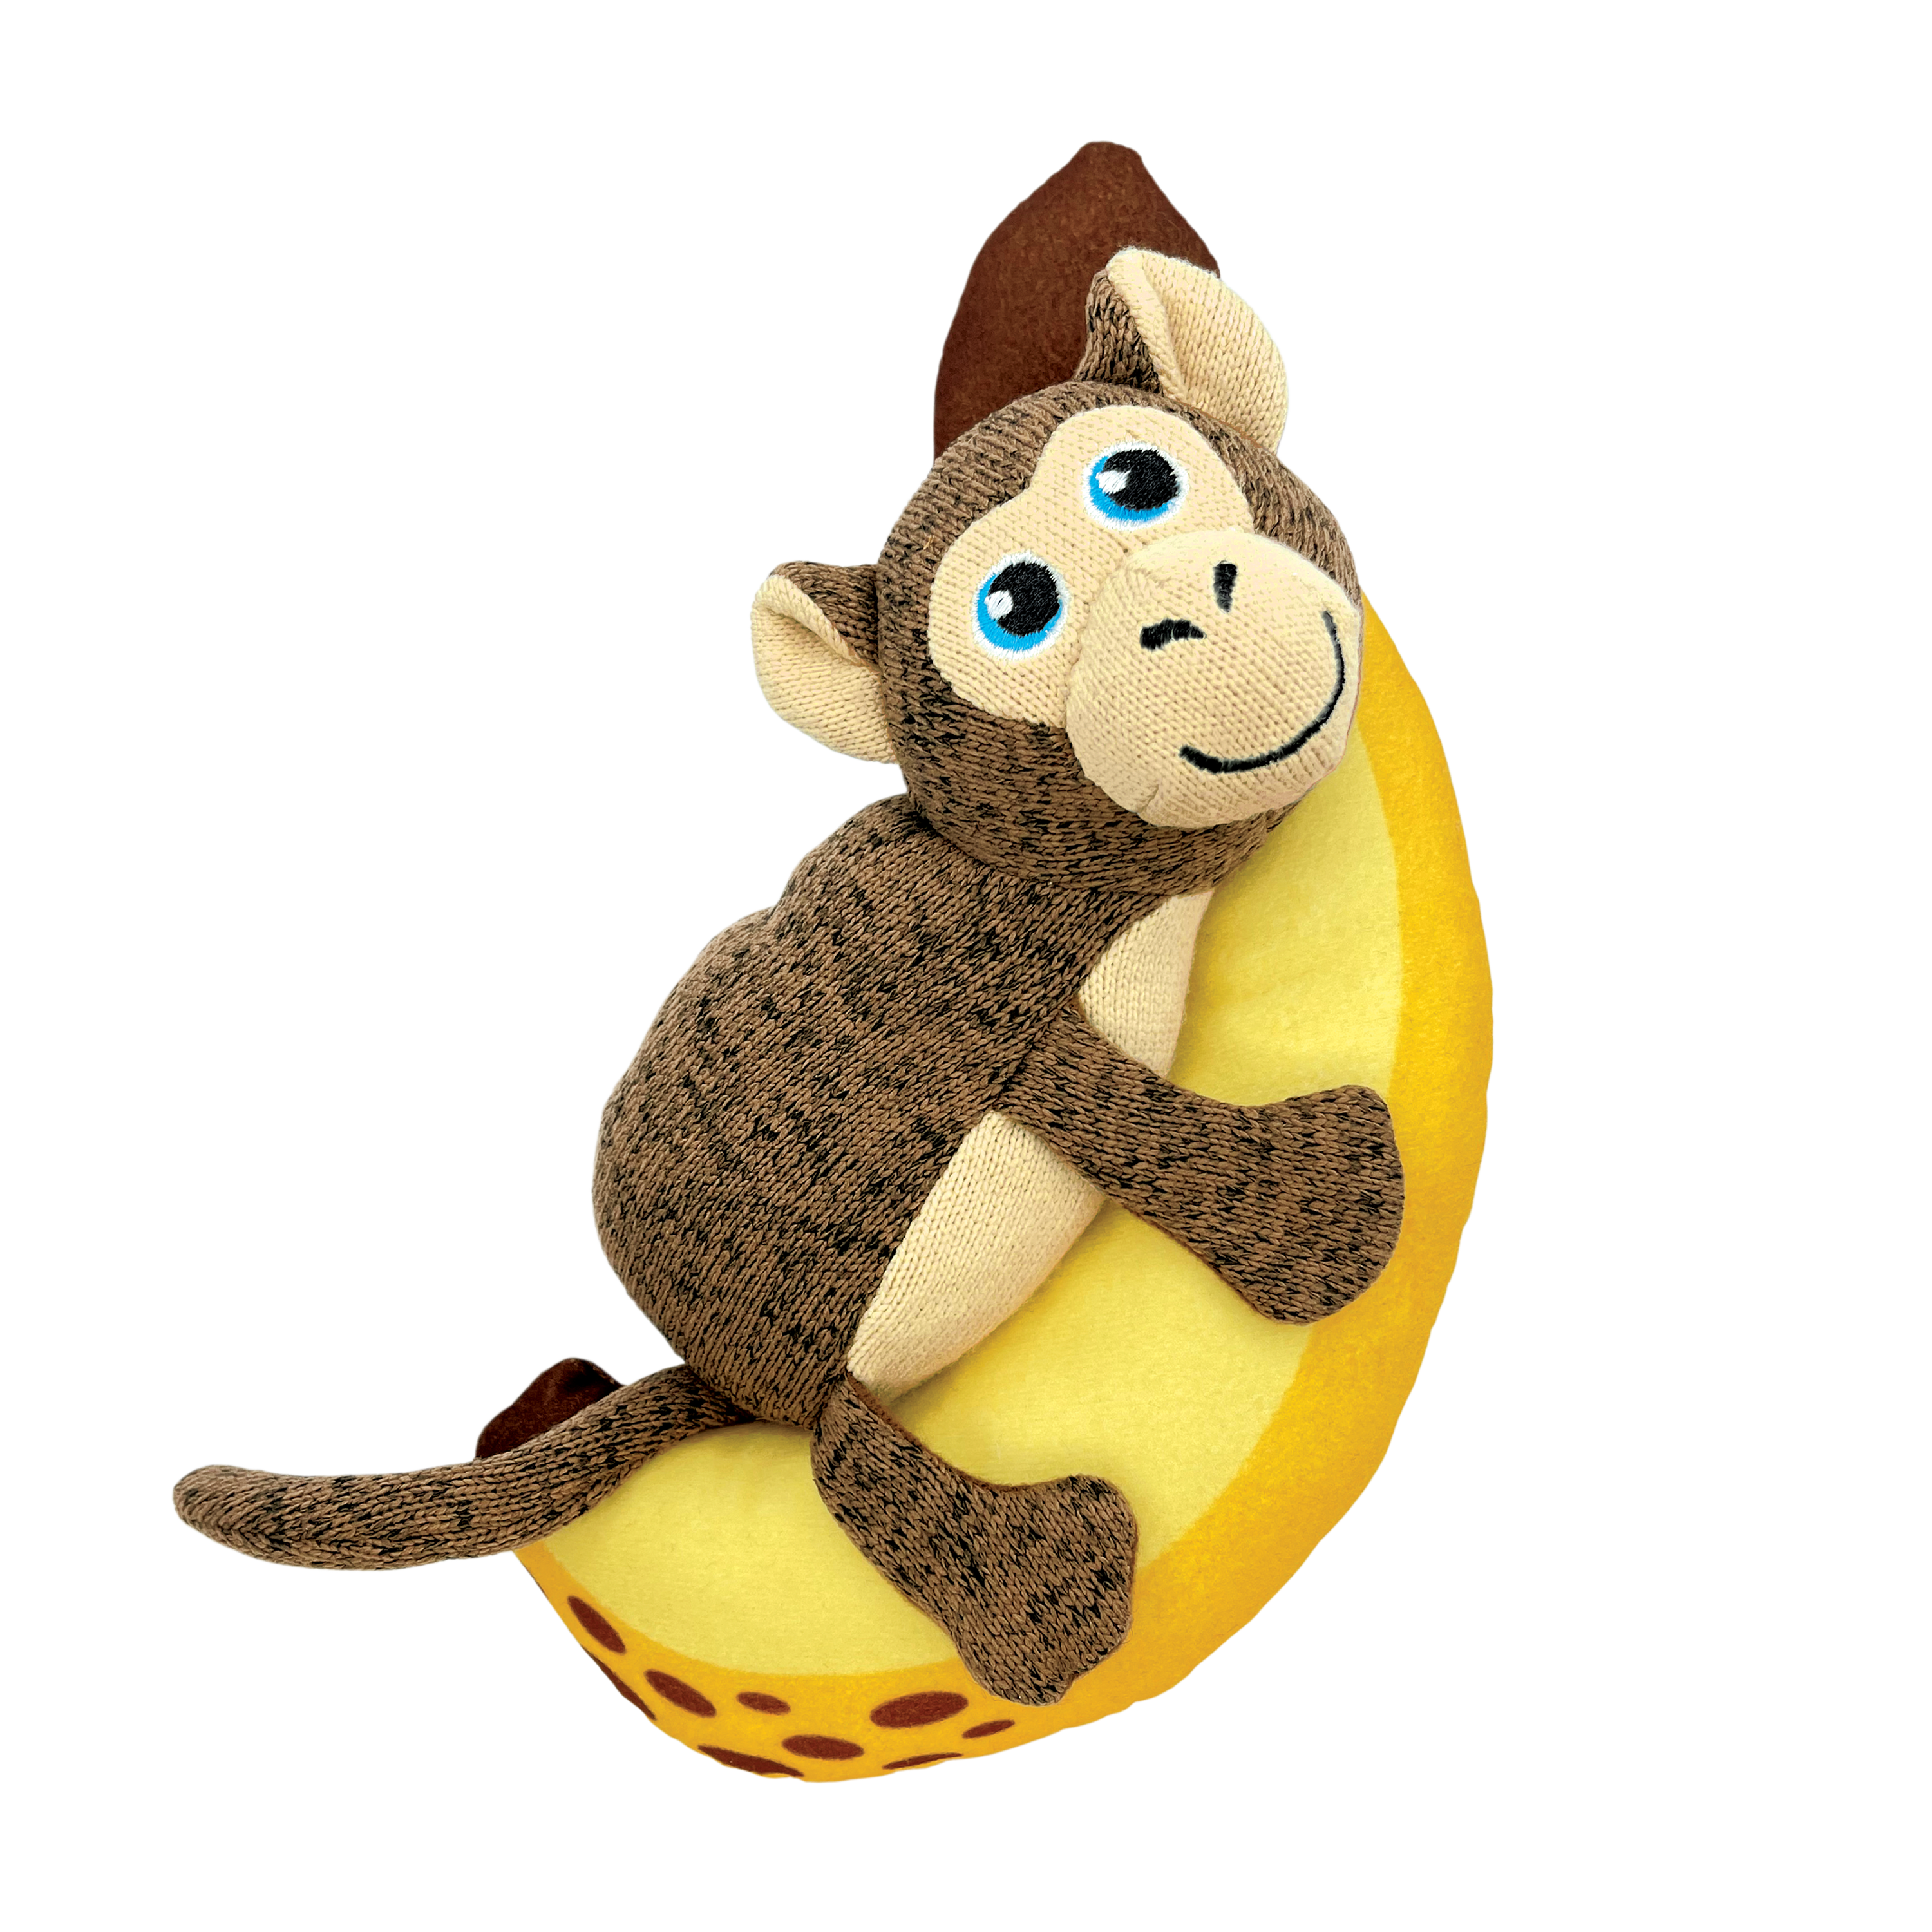 Pull-A-Partz Pals Monkey offpack product image